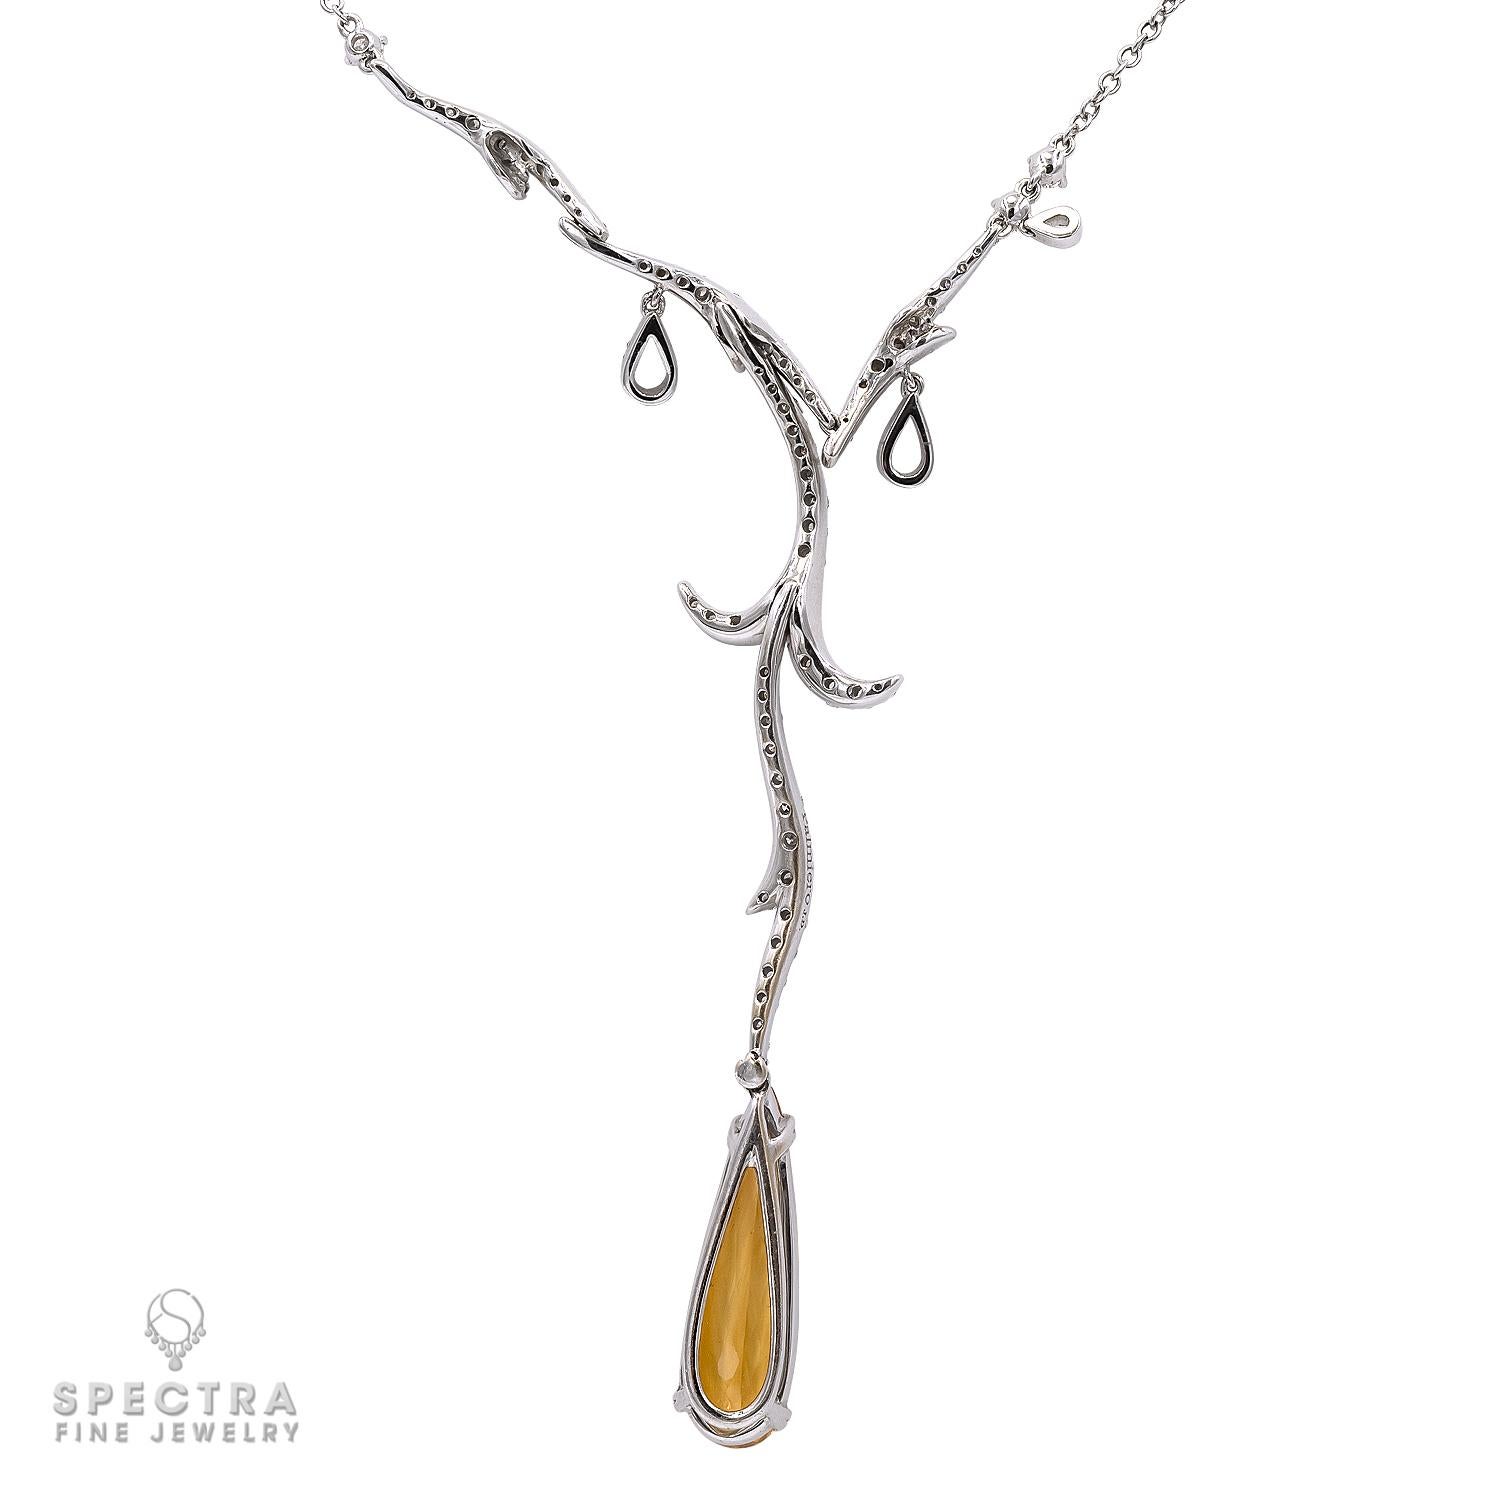 The unique look of drizzled diamonds glitters delicately in this artful Palmiero Diamond Yellow Topaz Lavalier Necklace, made in Italy in the 21st century. The jewel is magnificently crafted in 18K white gold and embellished with diamonds